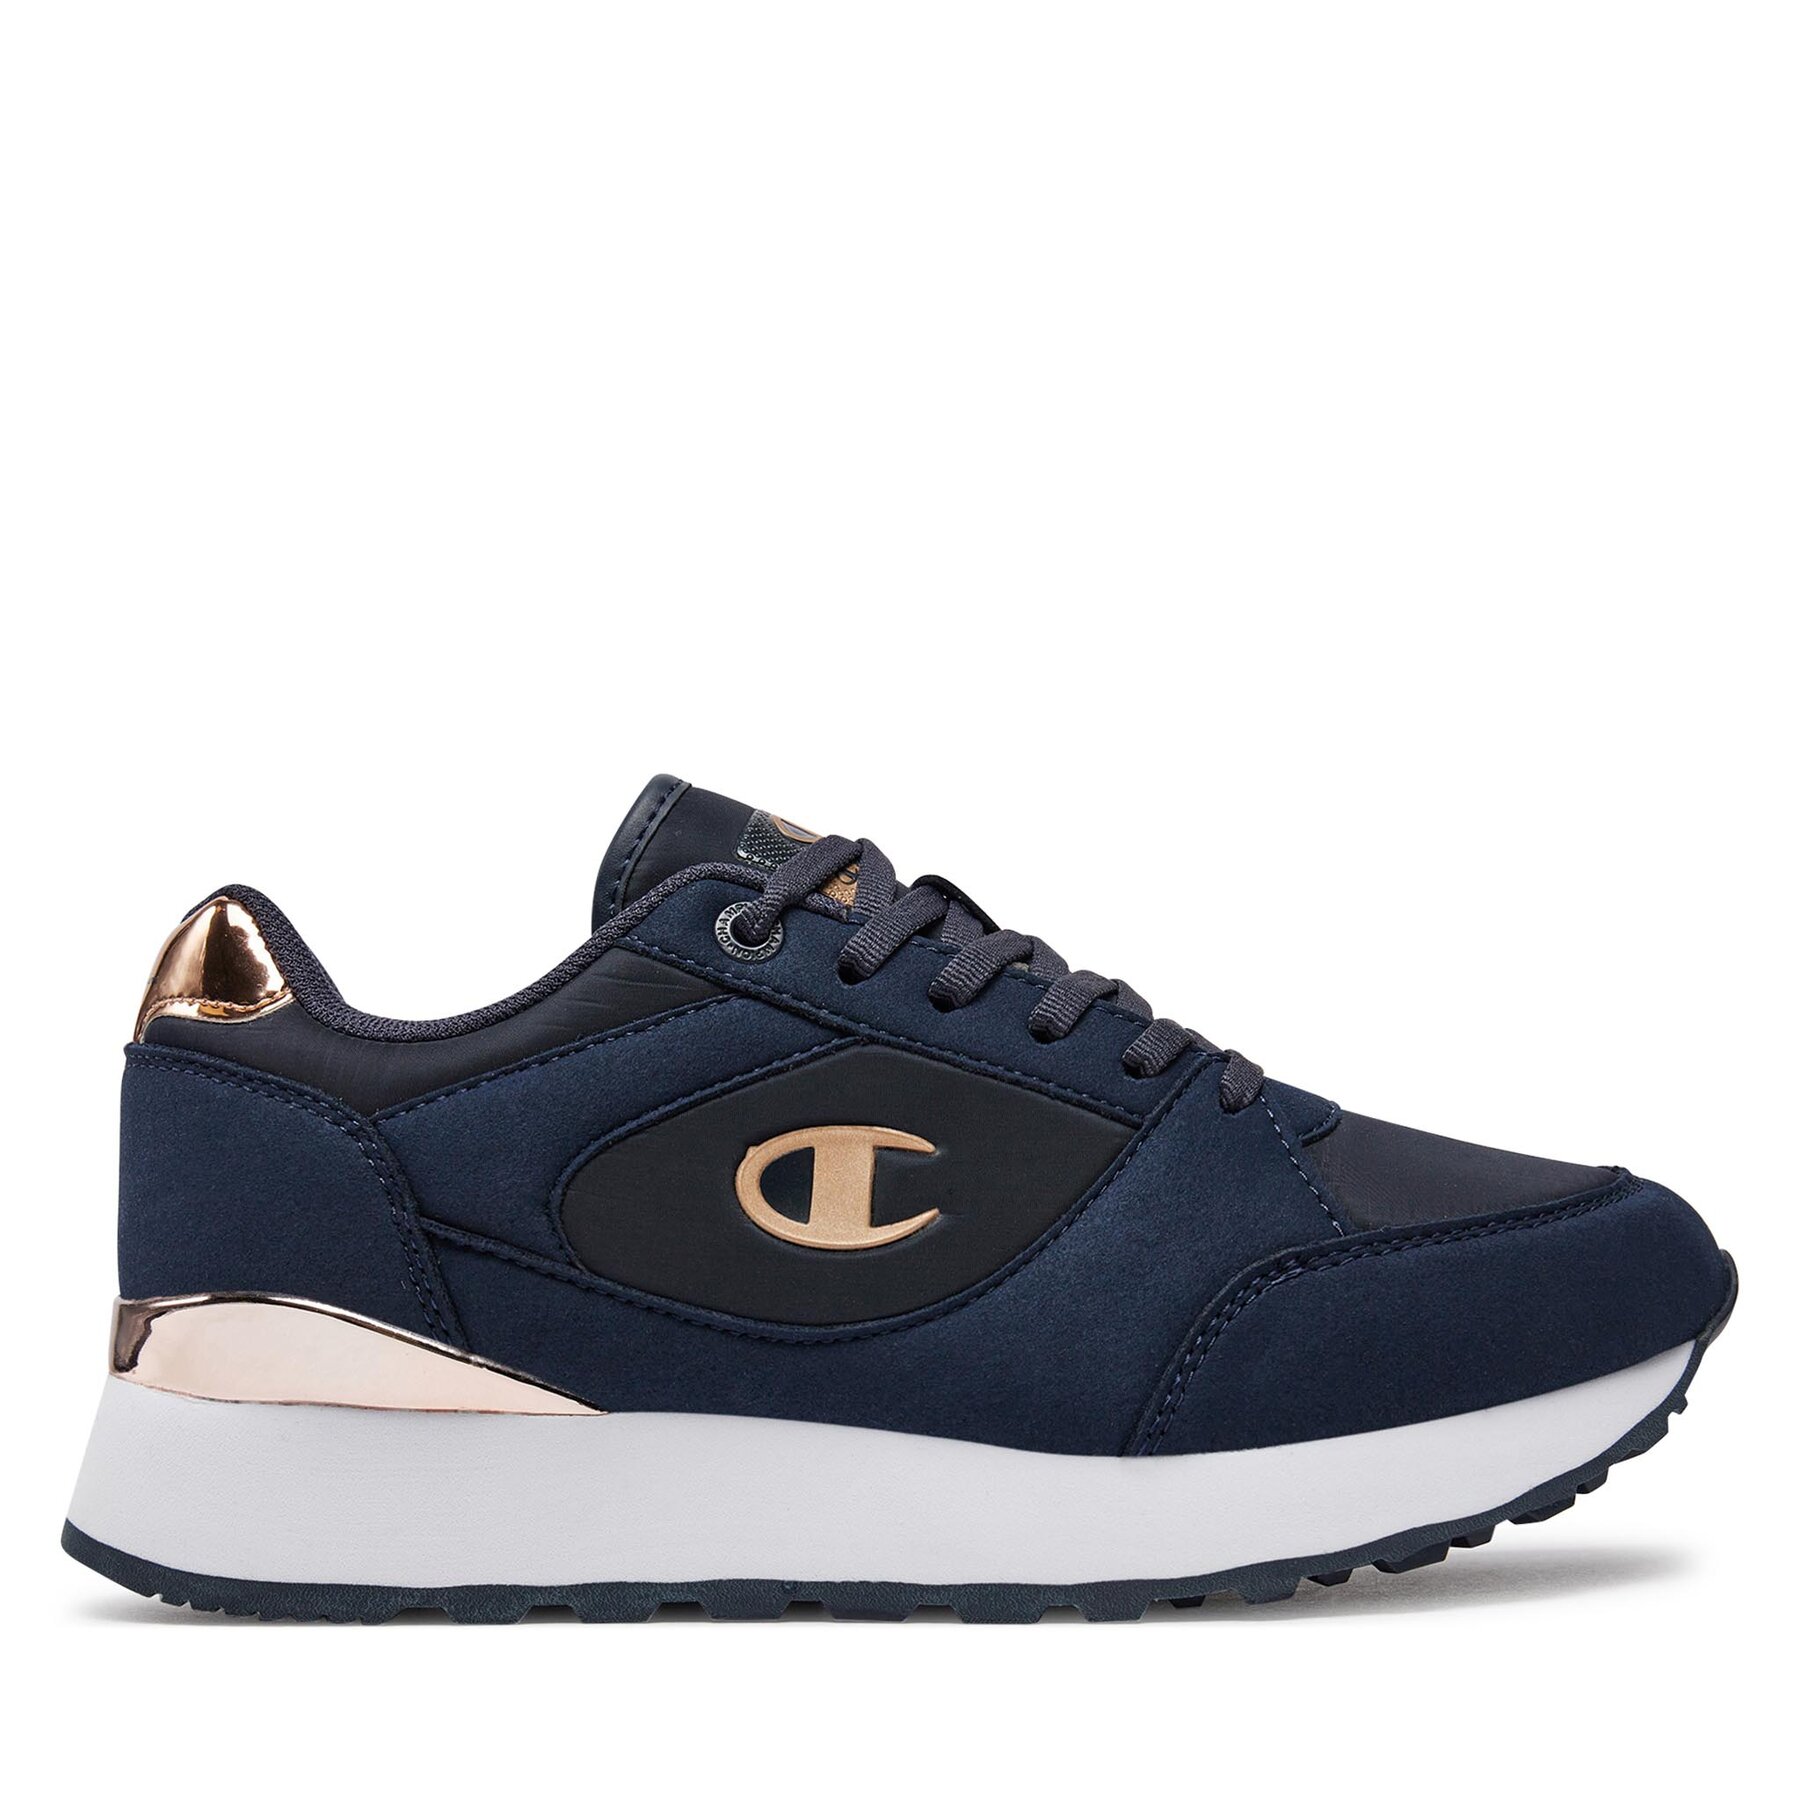 Sneakers Champion Rr Champ Plat Ny Low Cut Shoe S11685-CHA-BS502 Nny/Rose Gold von Champion